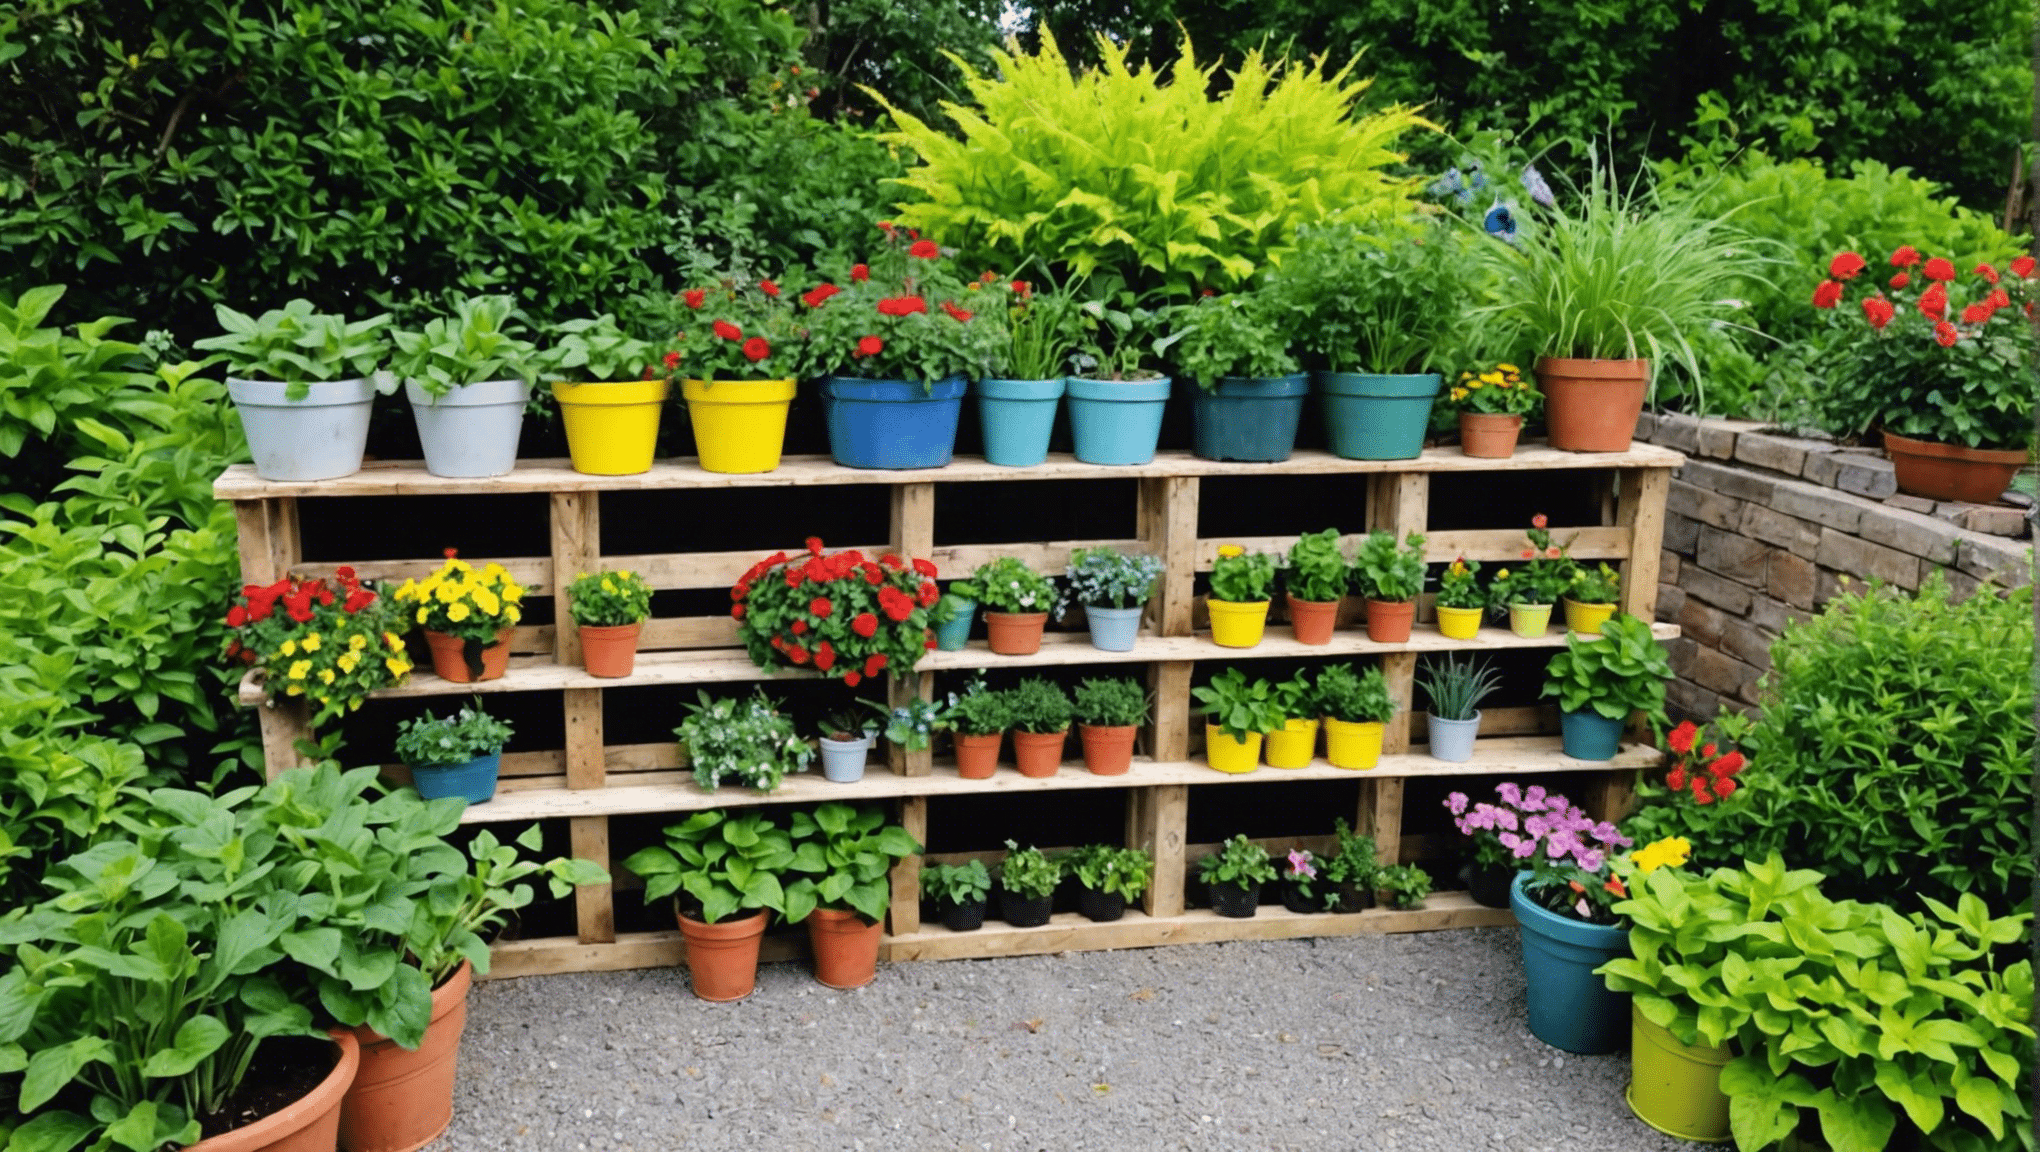 discover innovative and creative pallet gardening ideas to inspire your next outdoor project.